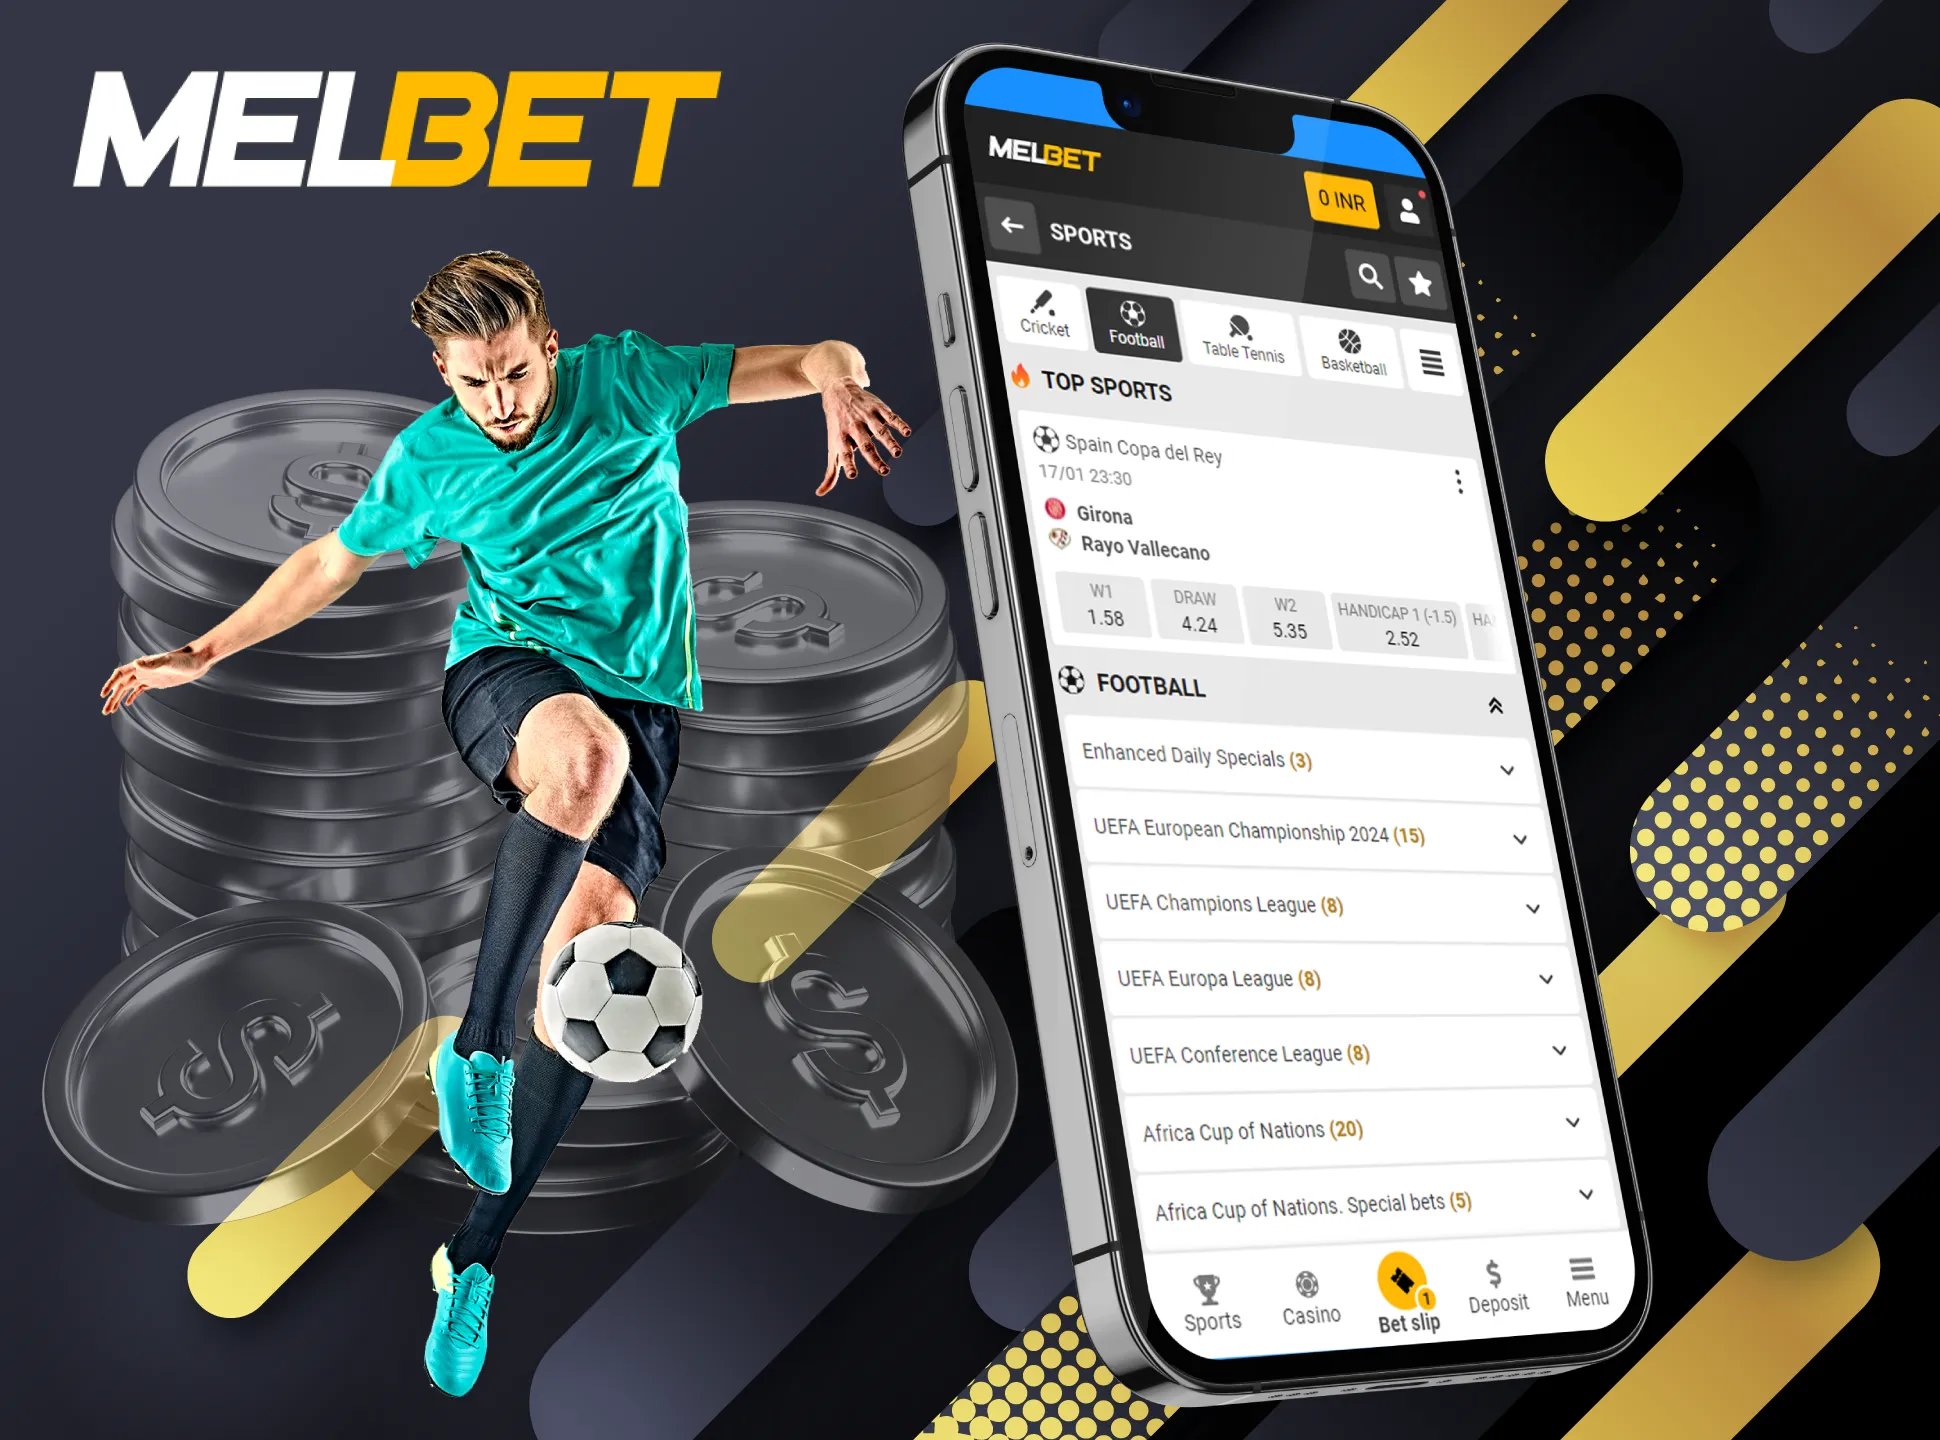 Place bets on your favorite football team in the Melbet app.